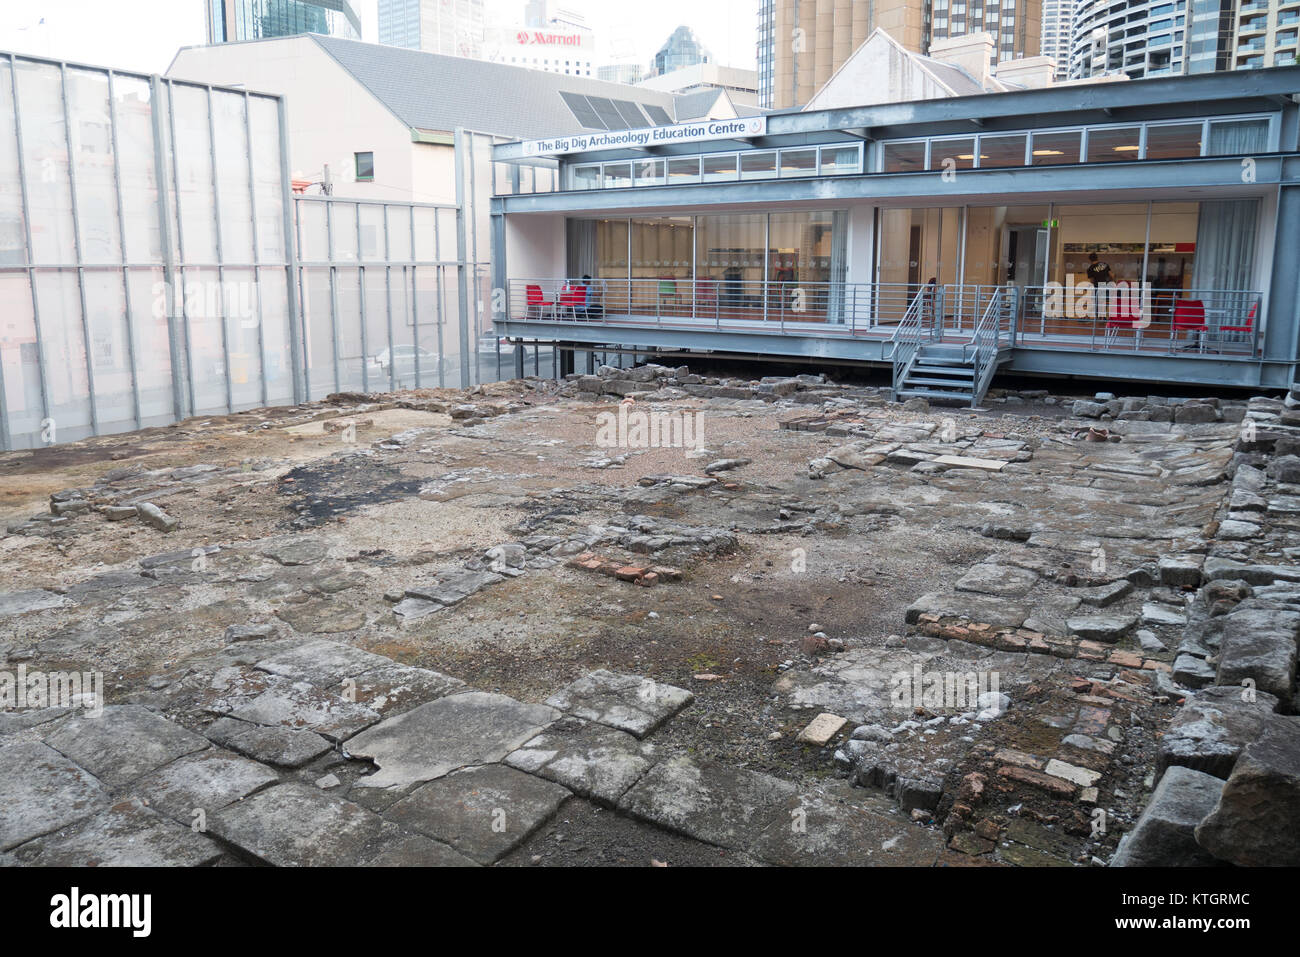 the big dig archaeology site in sydney Stock Photo